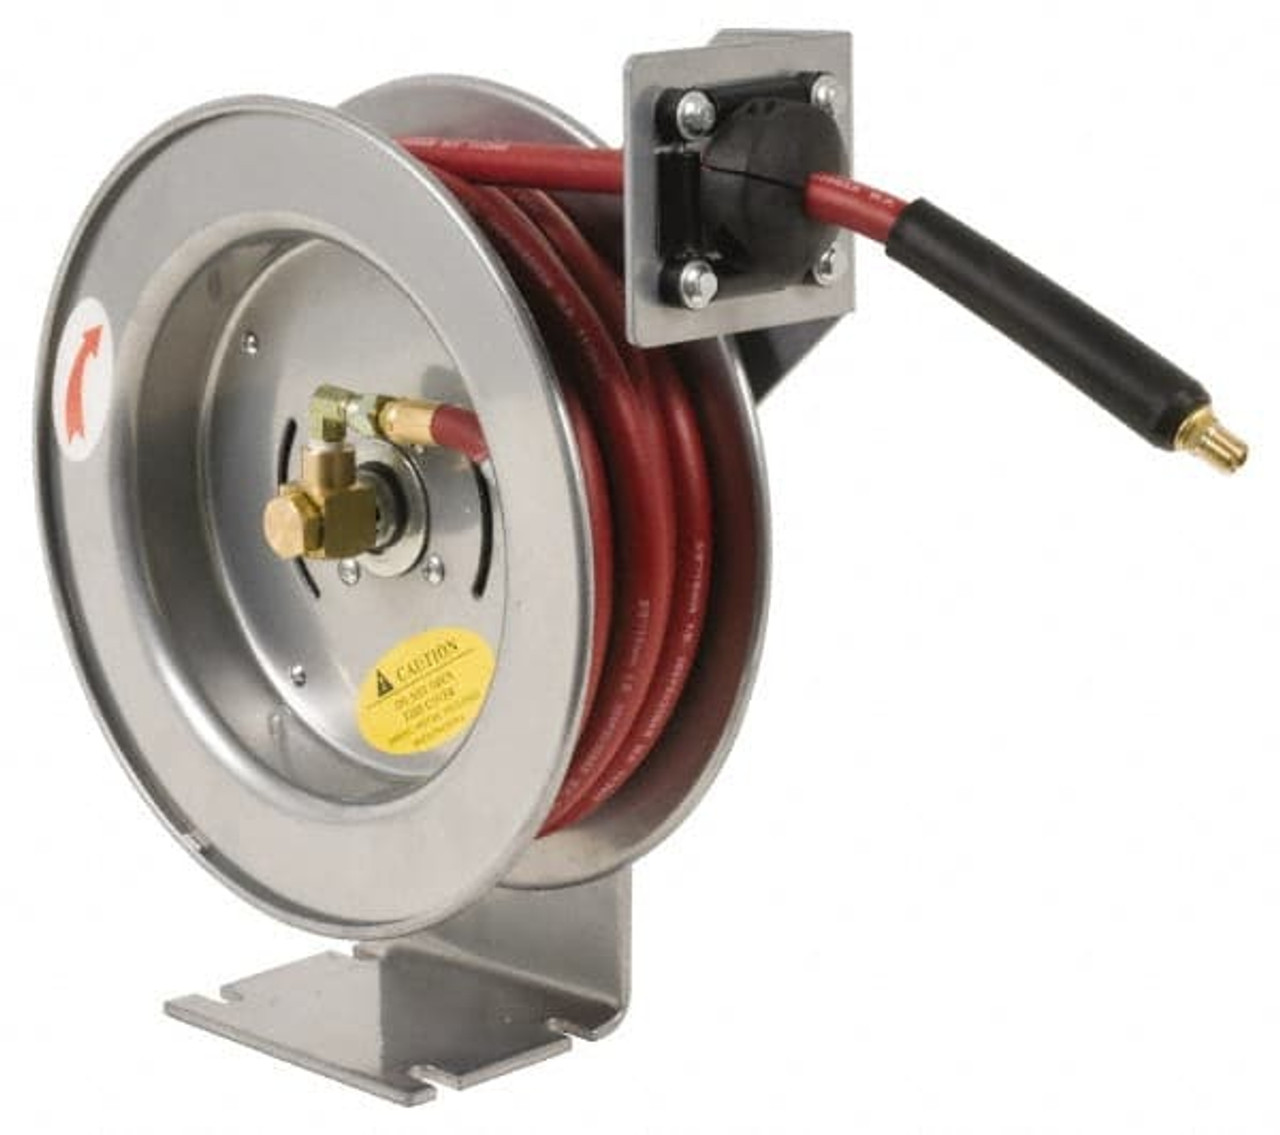 PRO-SOURCE 75 ft. Spring Retractable Hose Reel 300 psi, Hose Included  2810057510PRO - 60193026 - Penn Tool Co., Inc